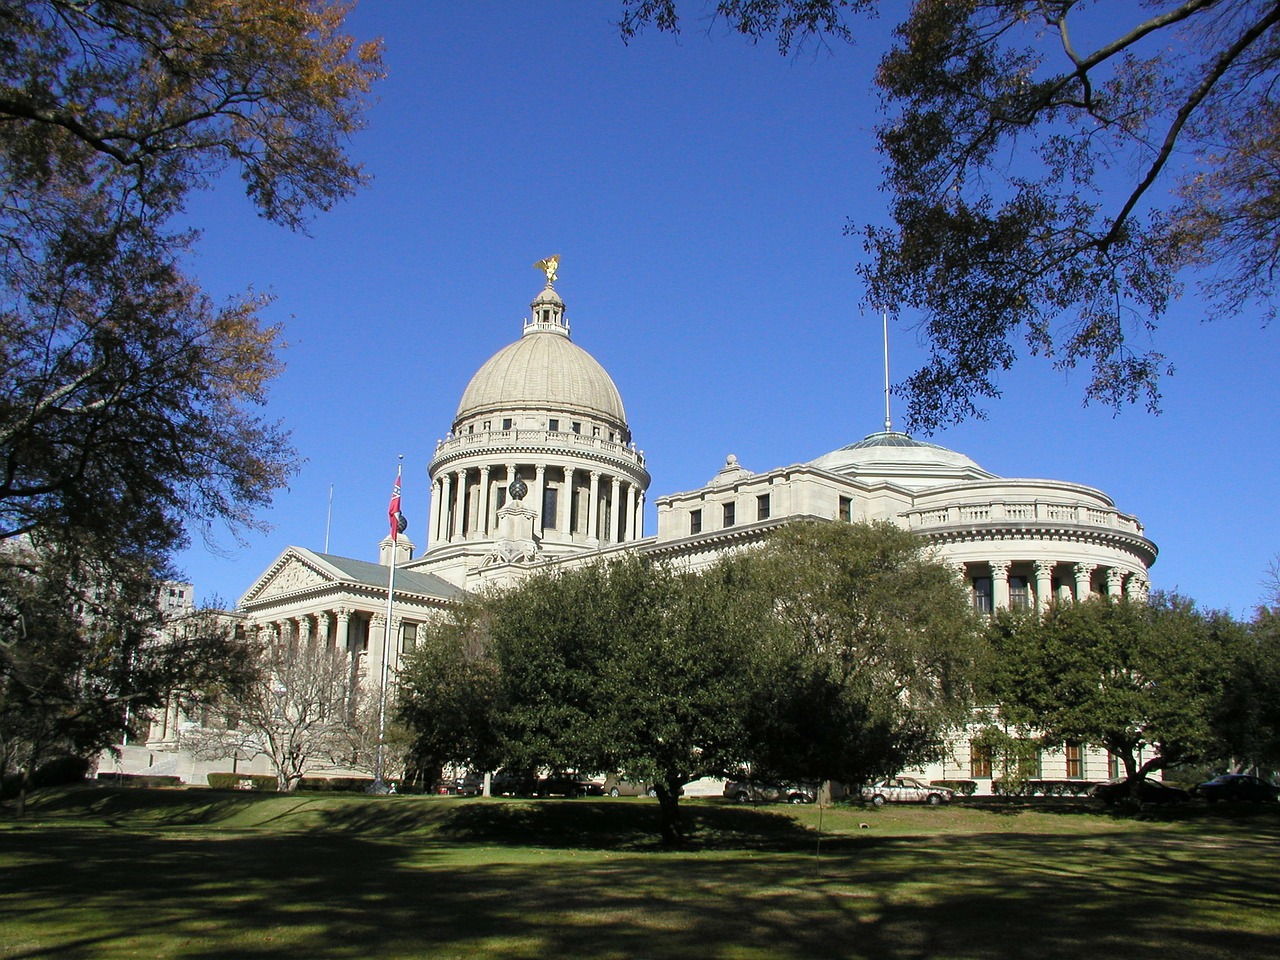 Mississippi residents allege state electoral system has discriminatory impact